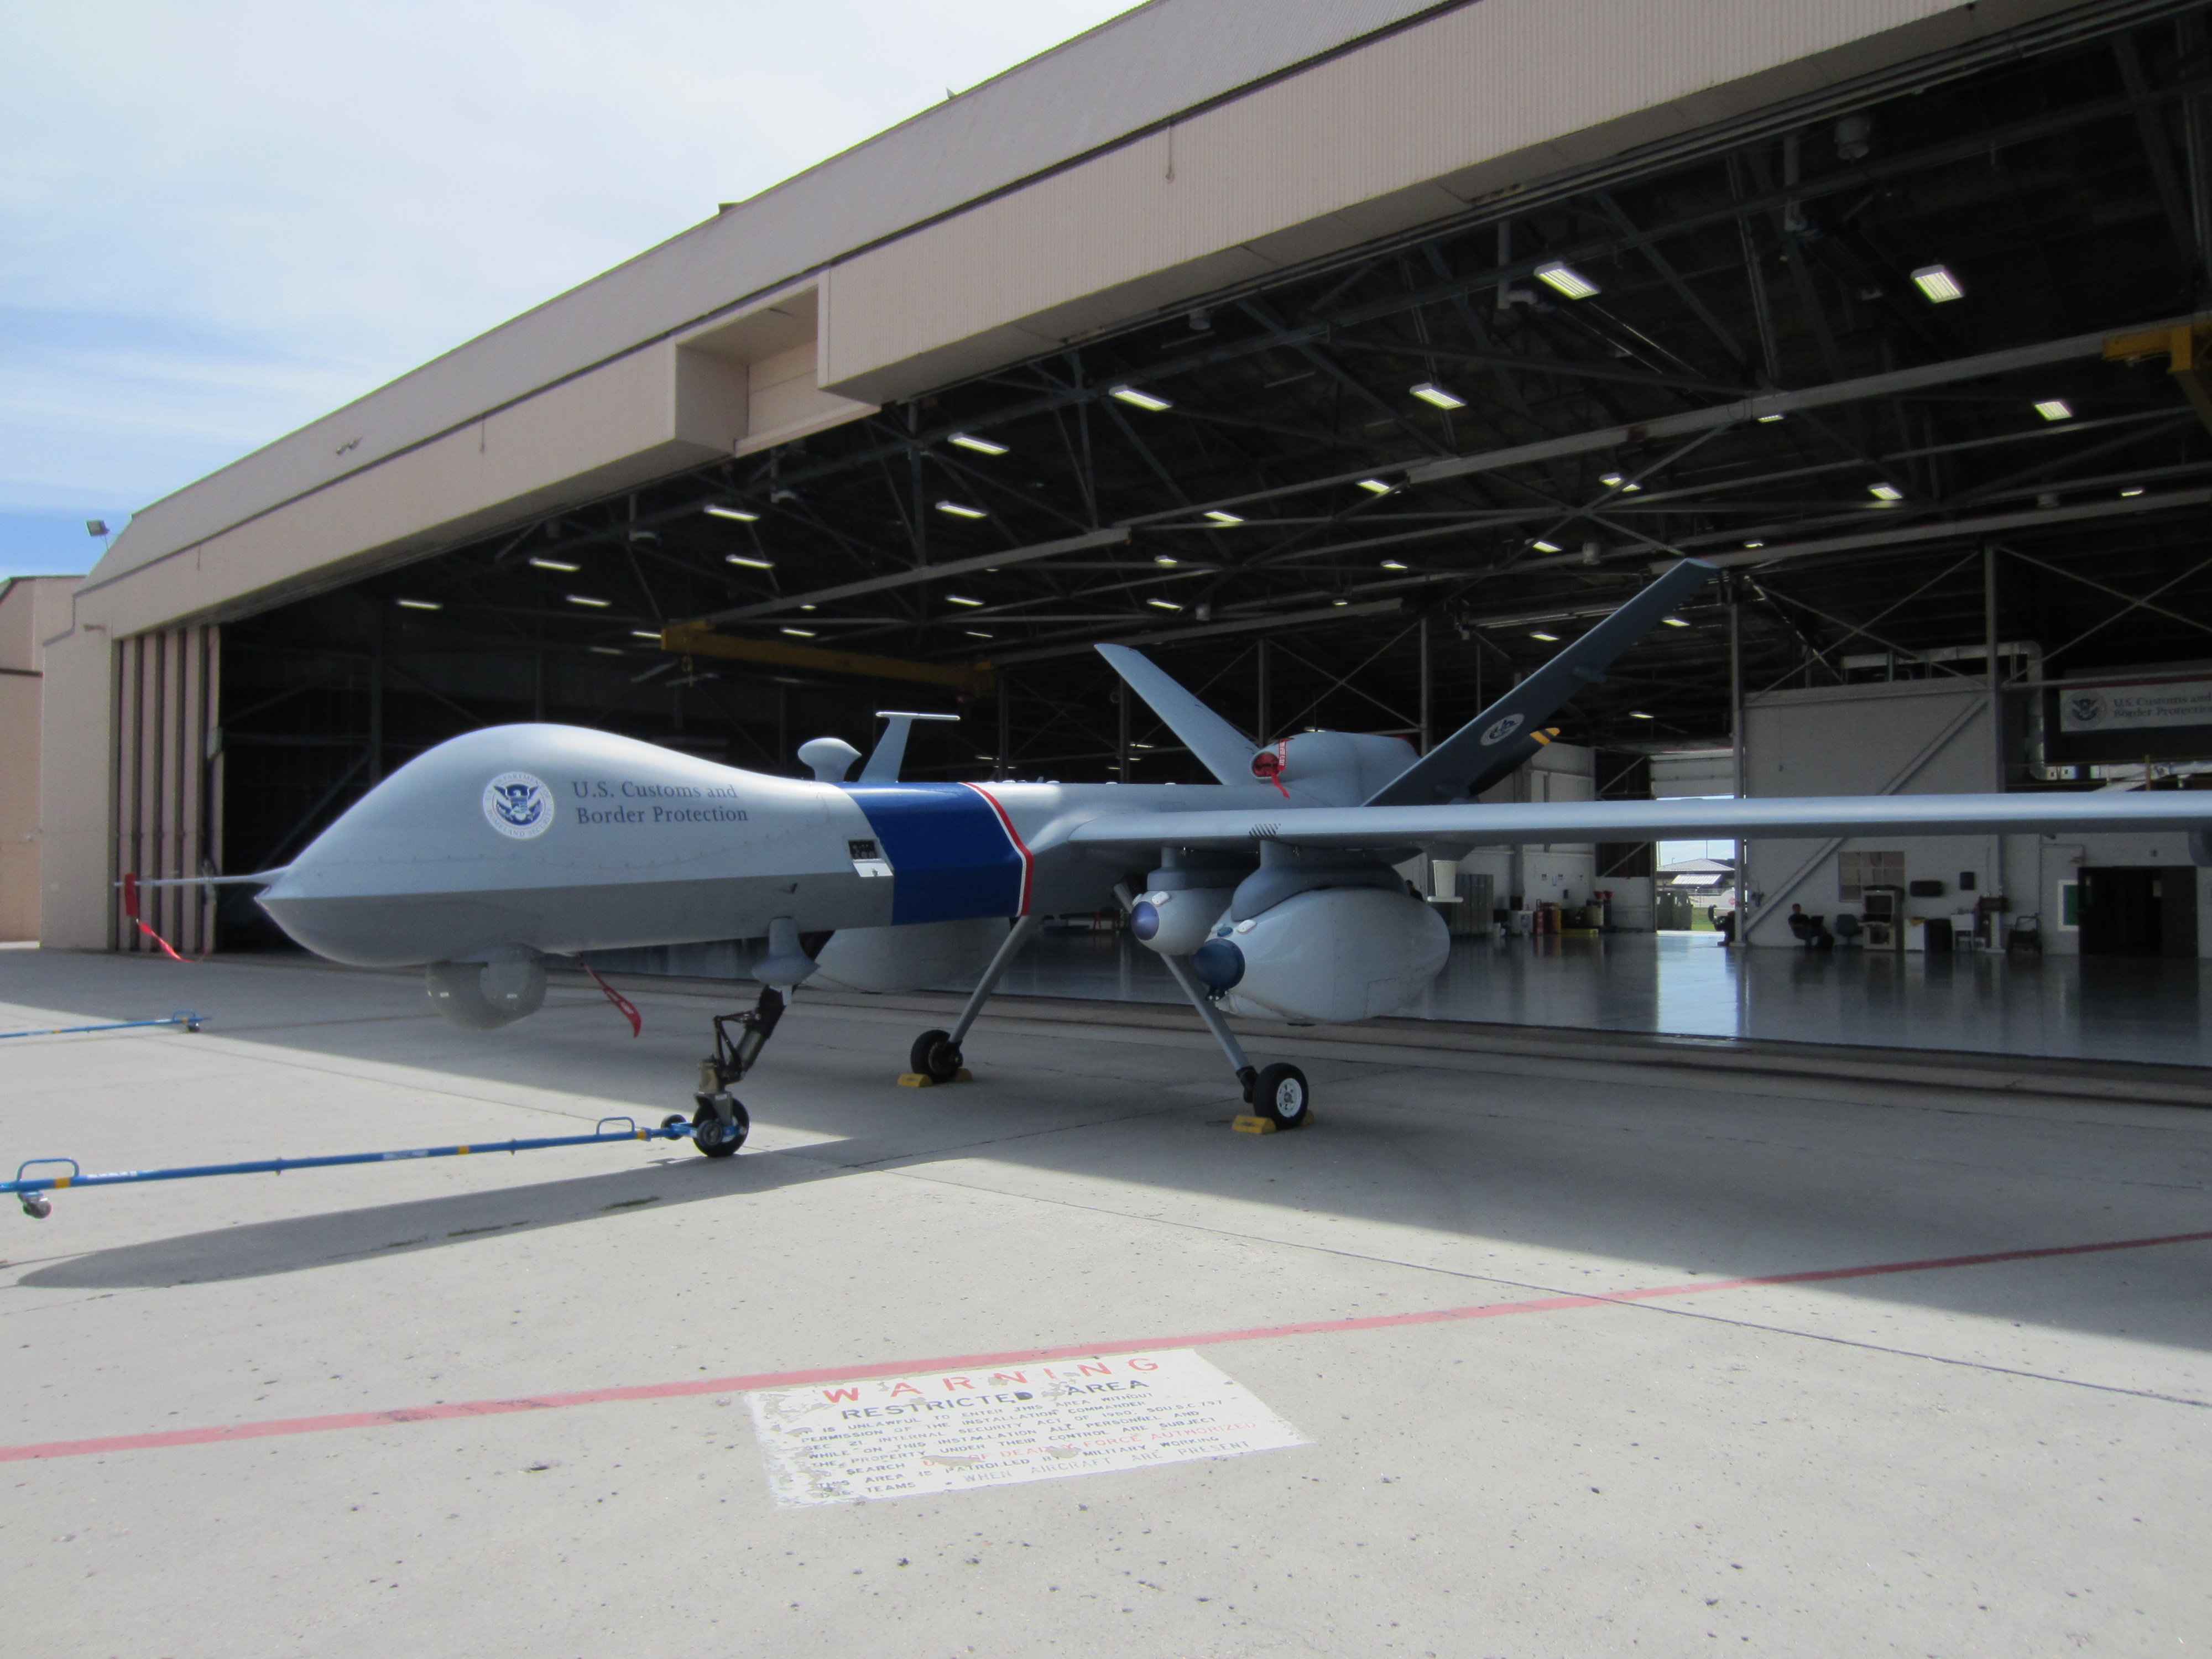 A large drone emerging from a a hangar